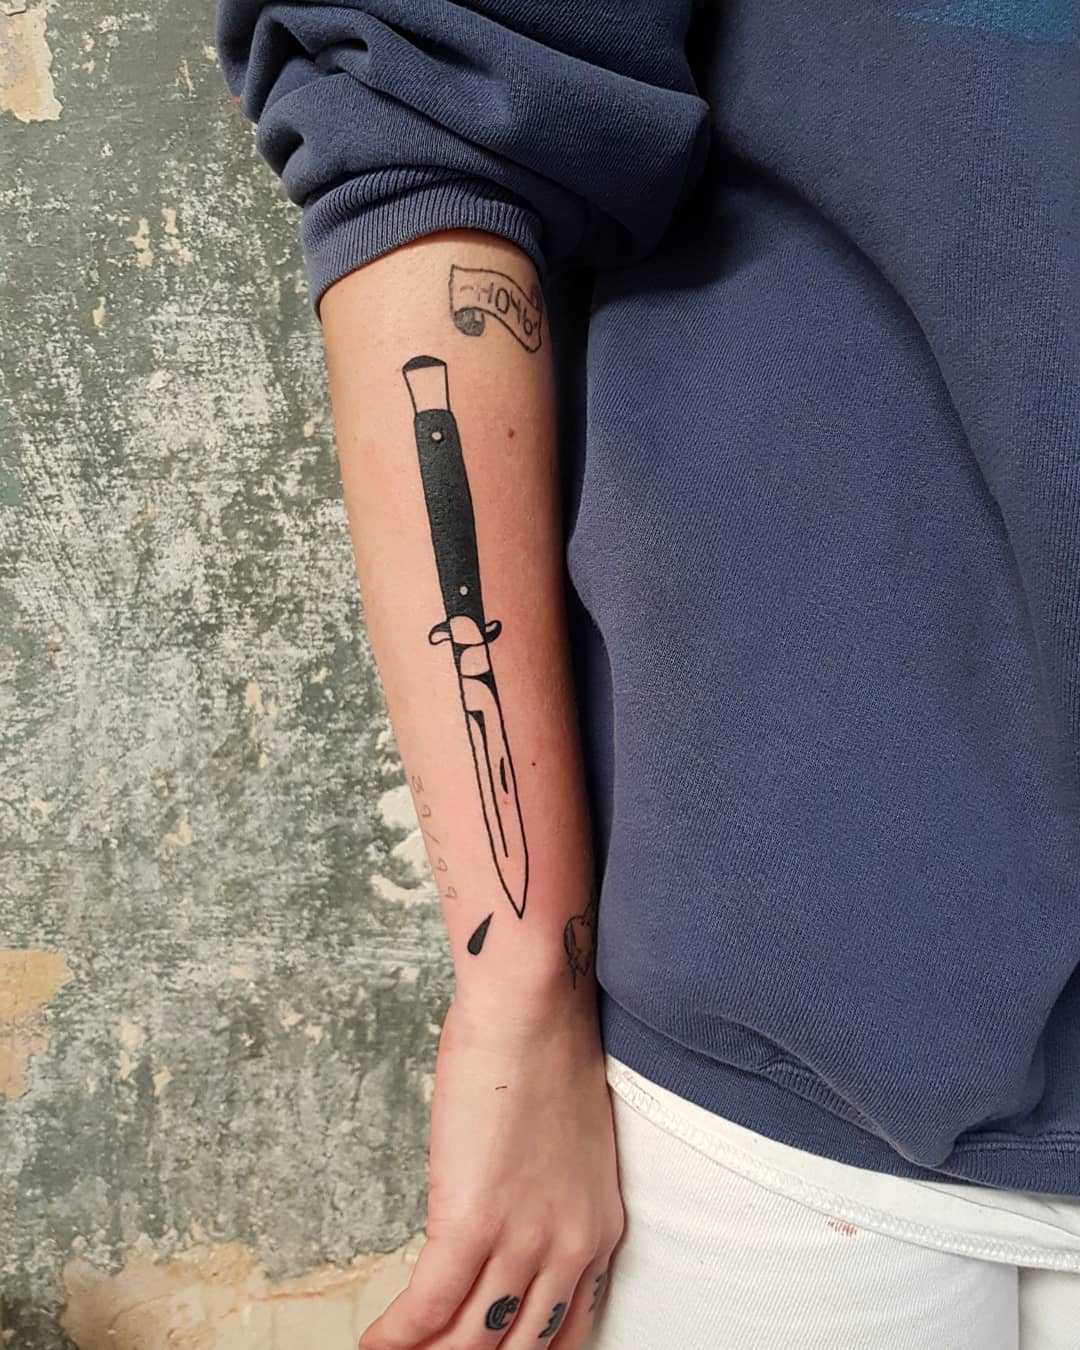 Switchblade tattoo on the right forearm 